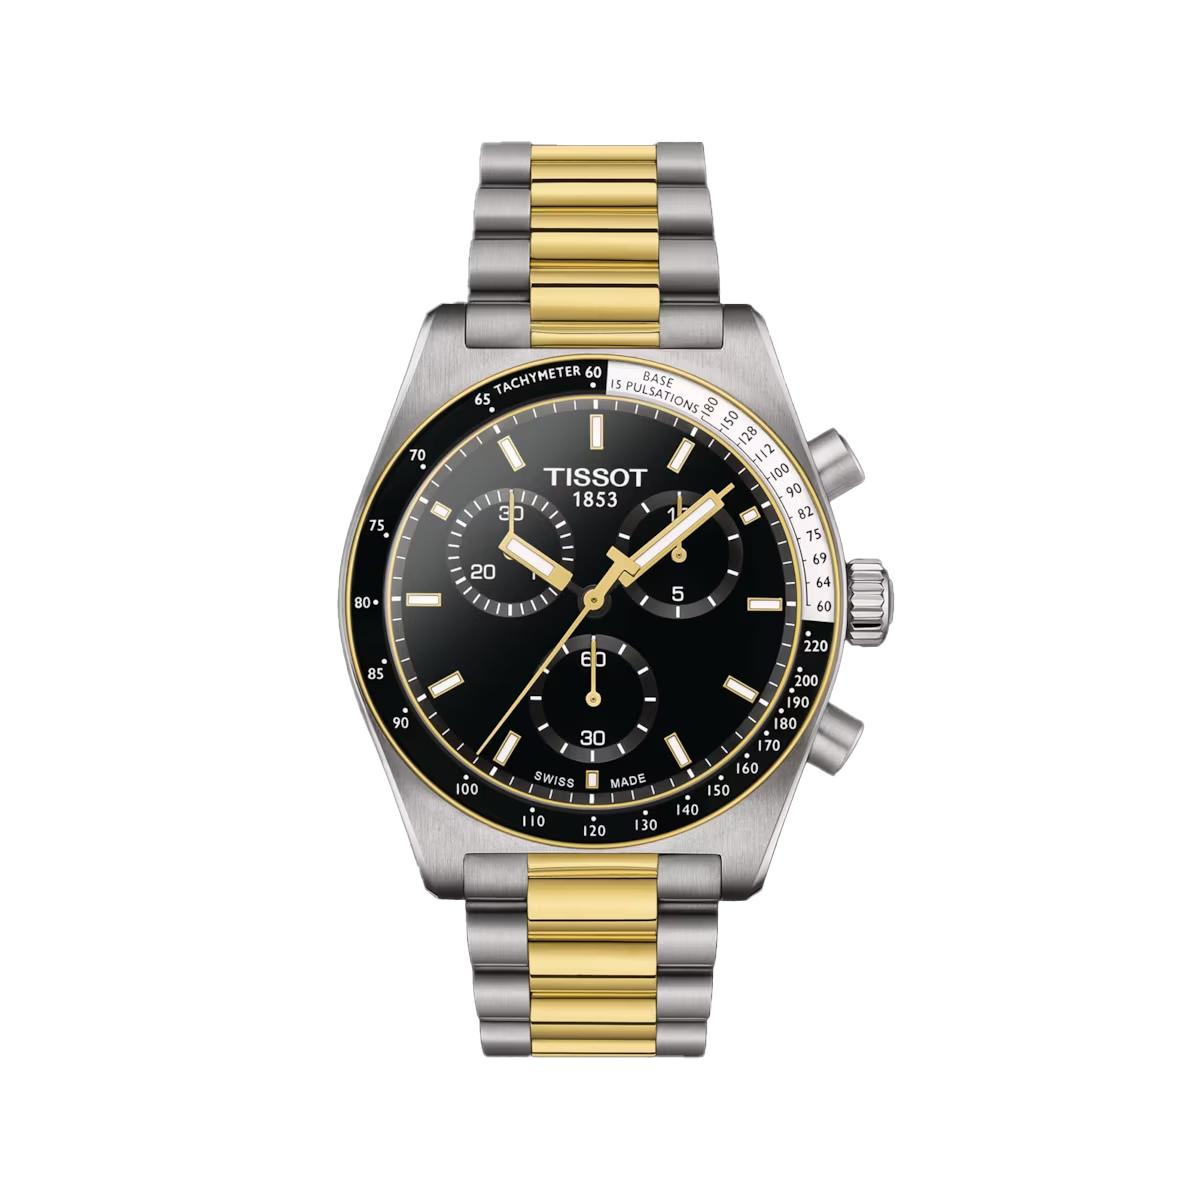 Two Tone Stainless Steel And Yellow Gold Plated Tissot PR 516 Chronograph